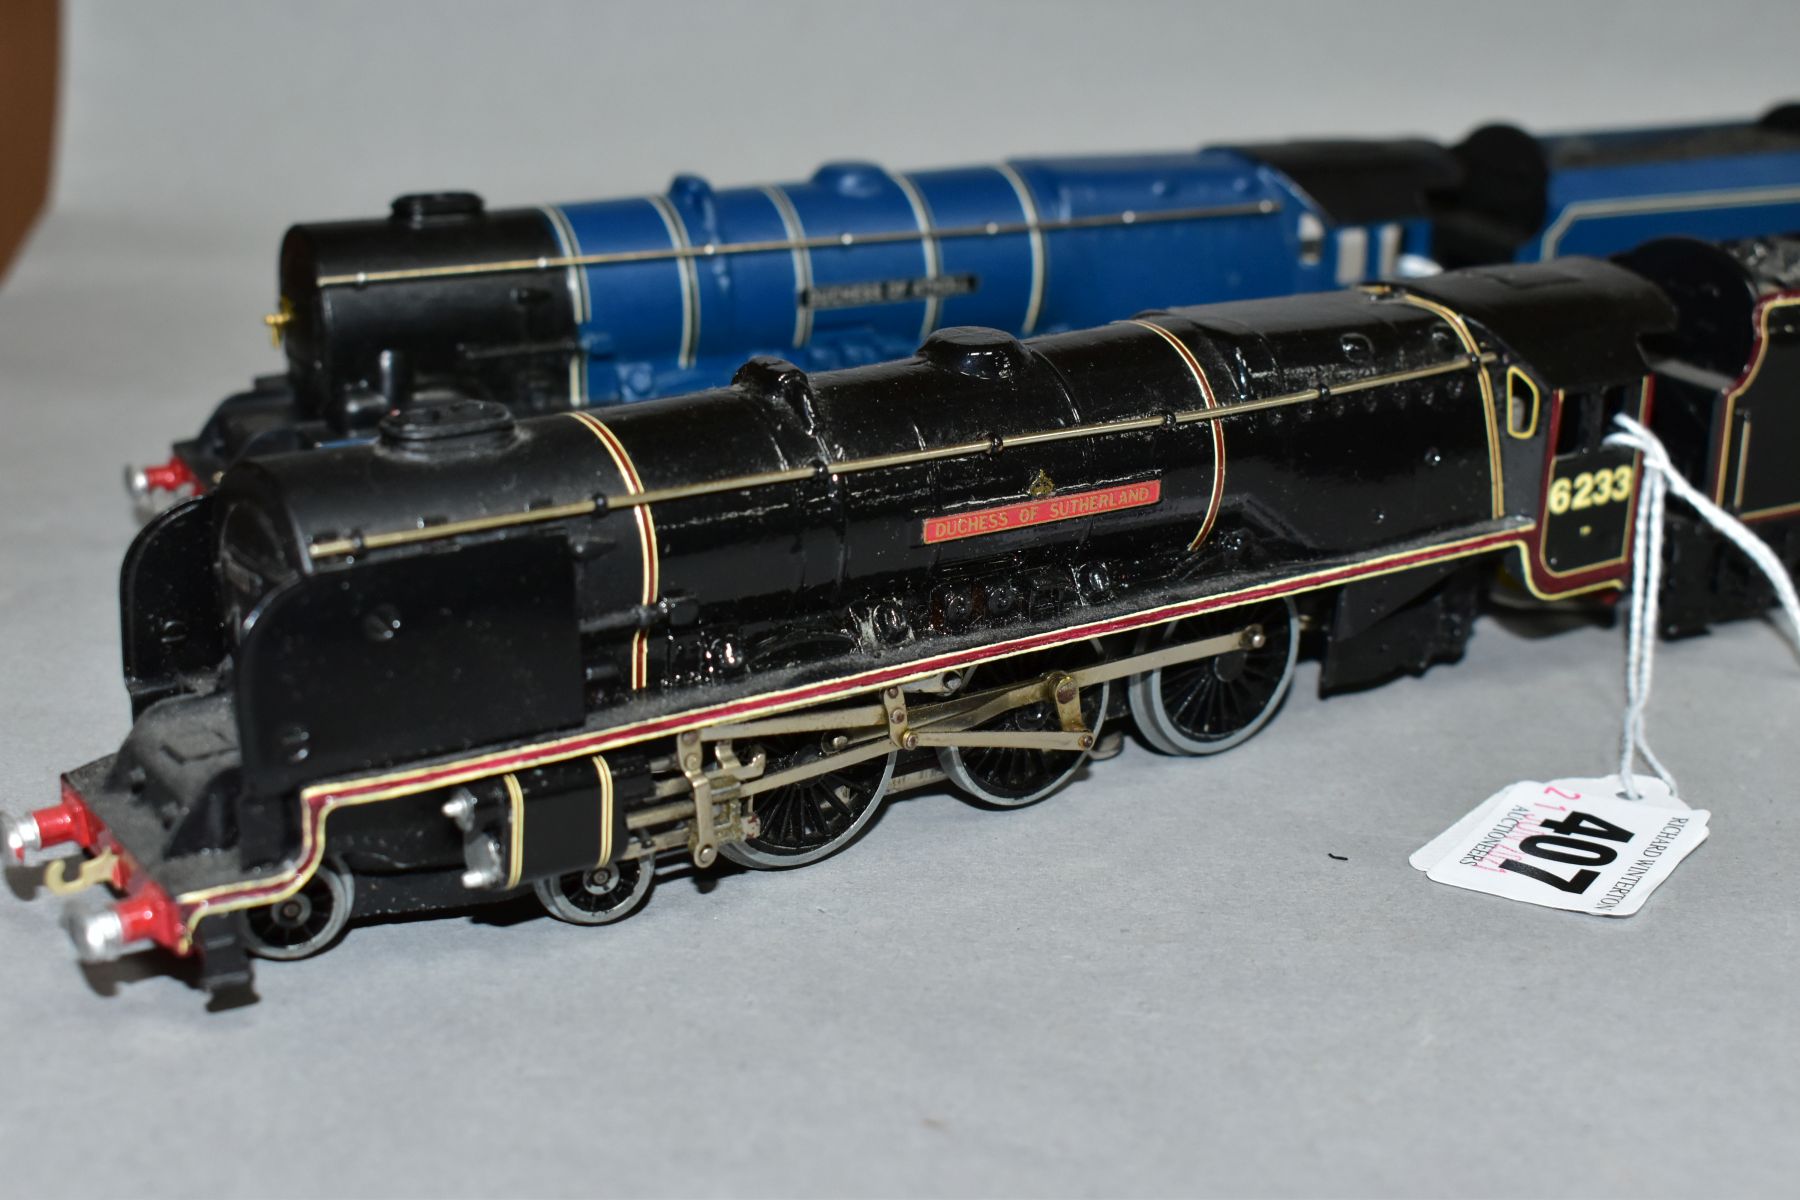 TWO UNBOXED HORNBY DUBLO DUCHESS CLASS LOCOMOTIVES, 'Duchess of Sutherland' No. 6233, L.M.S. Lined - Image 2 of 5